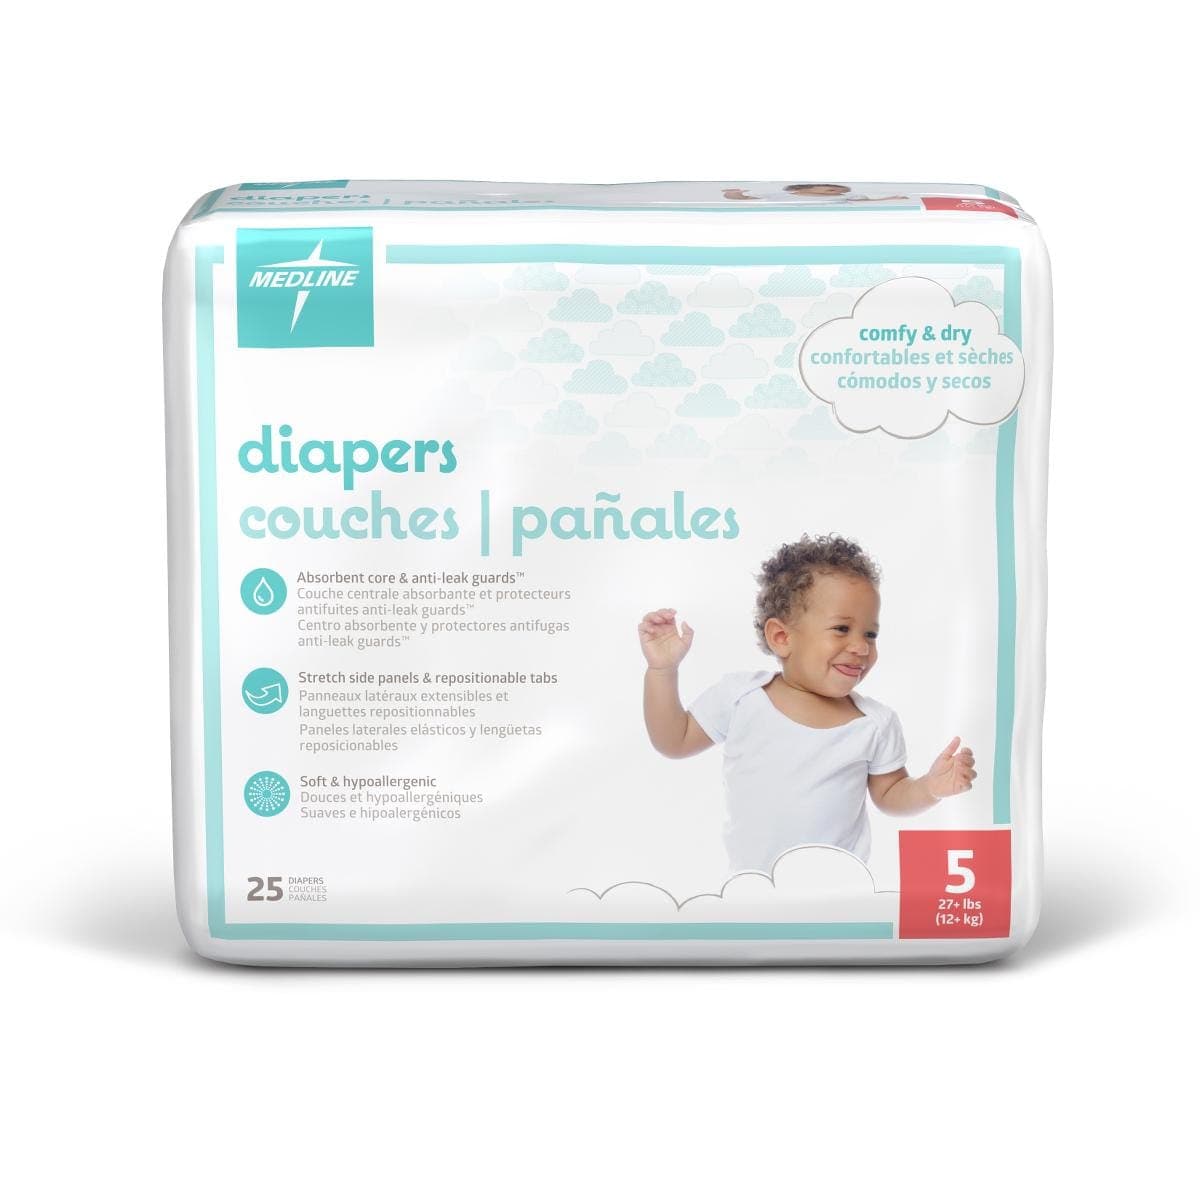 Medline 27+ lbs / Case of 200 Medline Disposable Baby Diapers